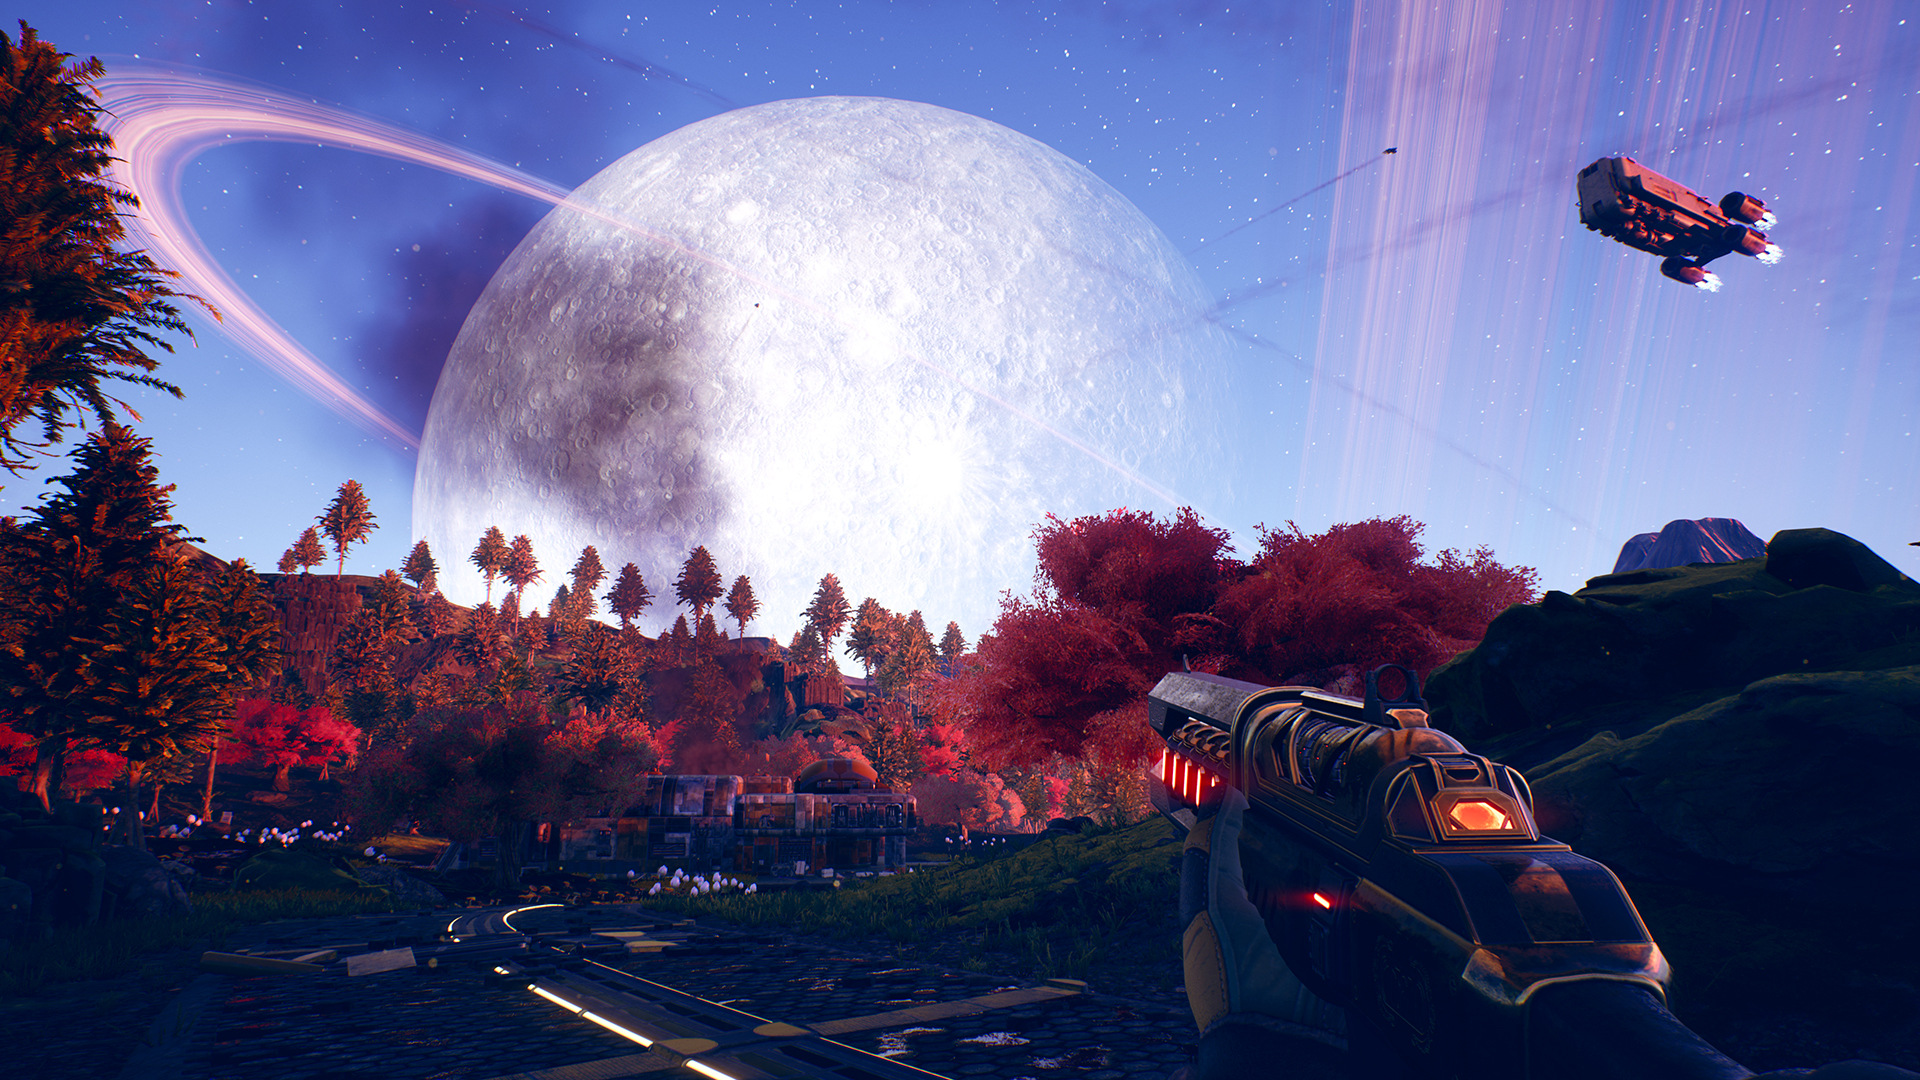 A New Installment of Booze-Soaked DLC Is Headed To Outer Worlds, According To Leak